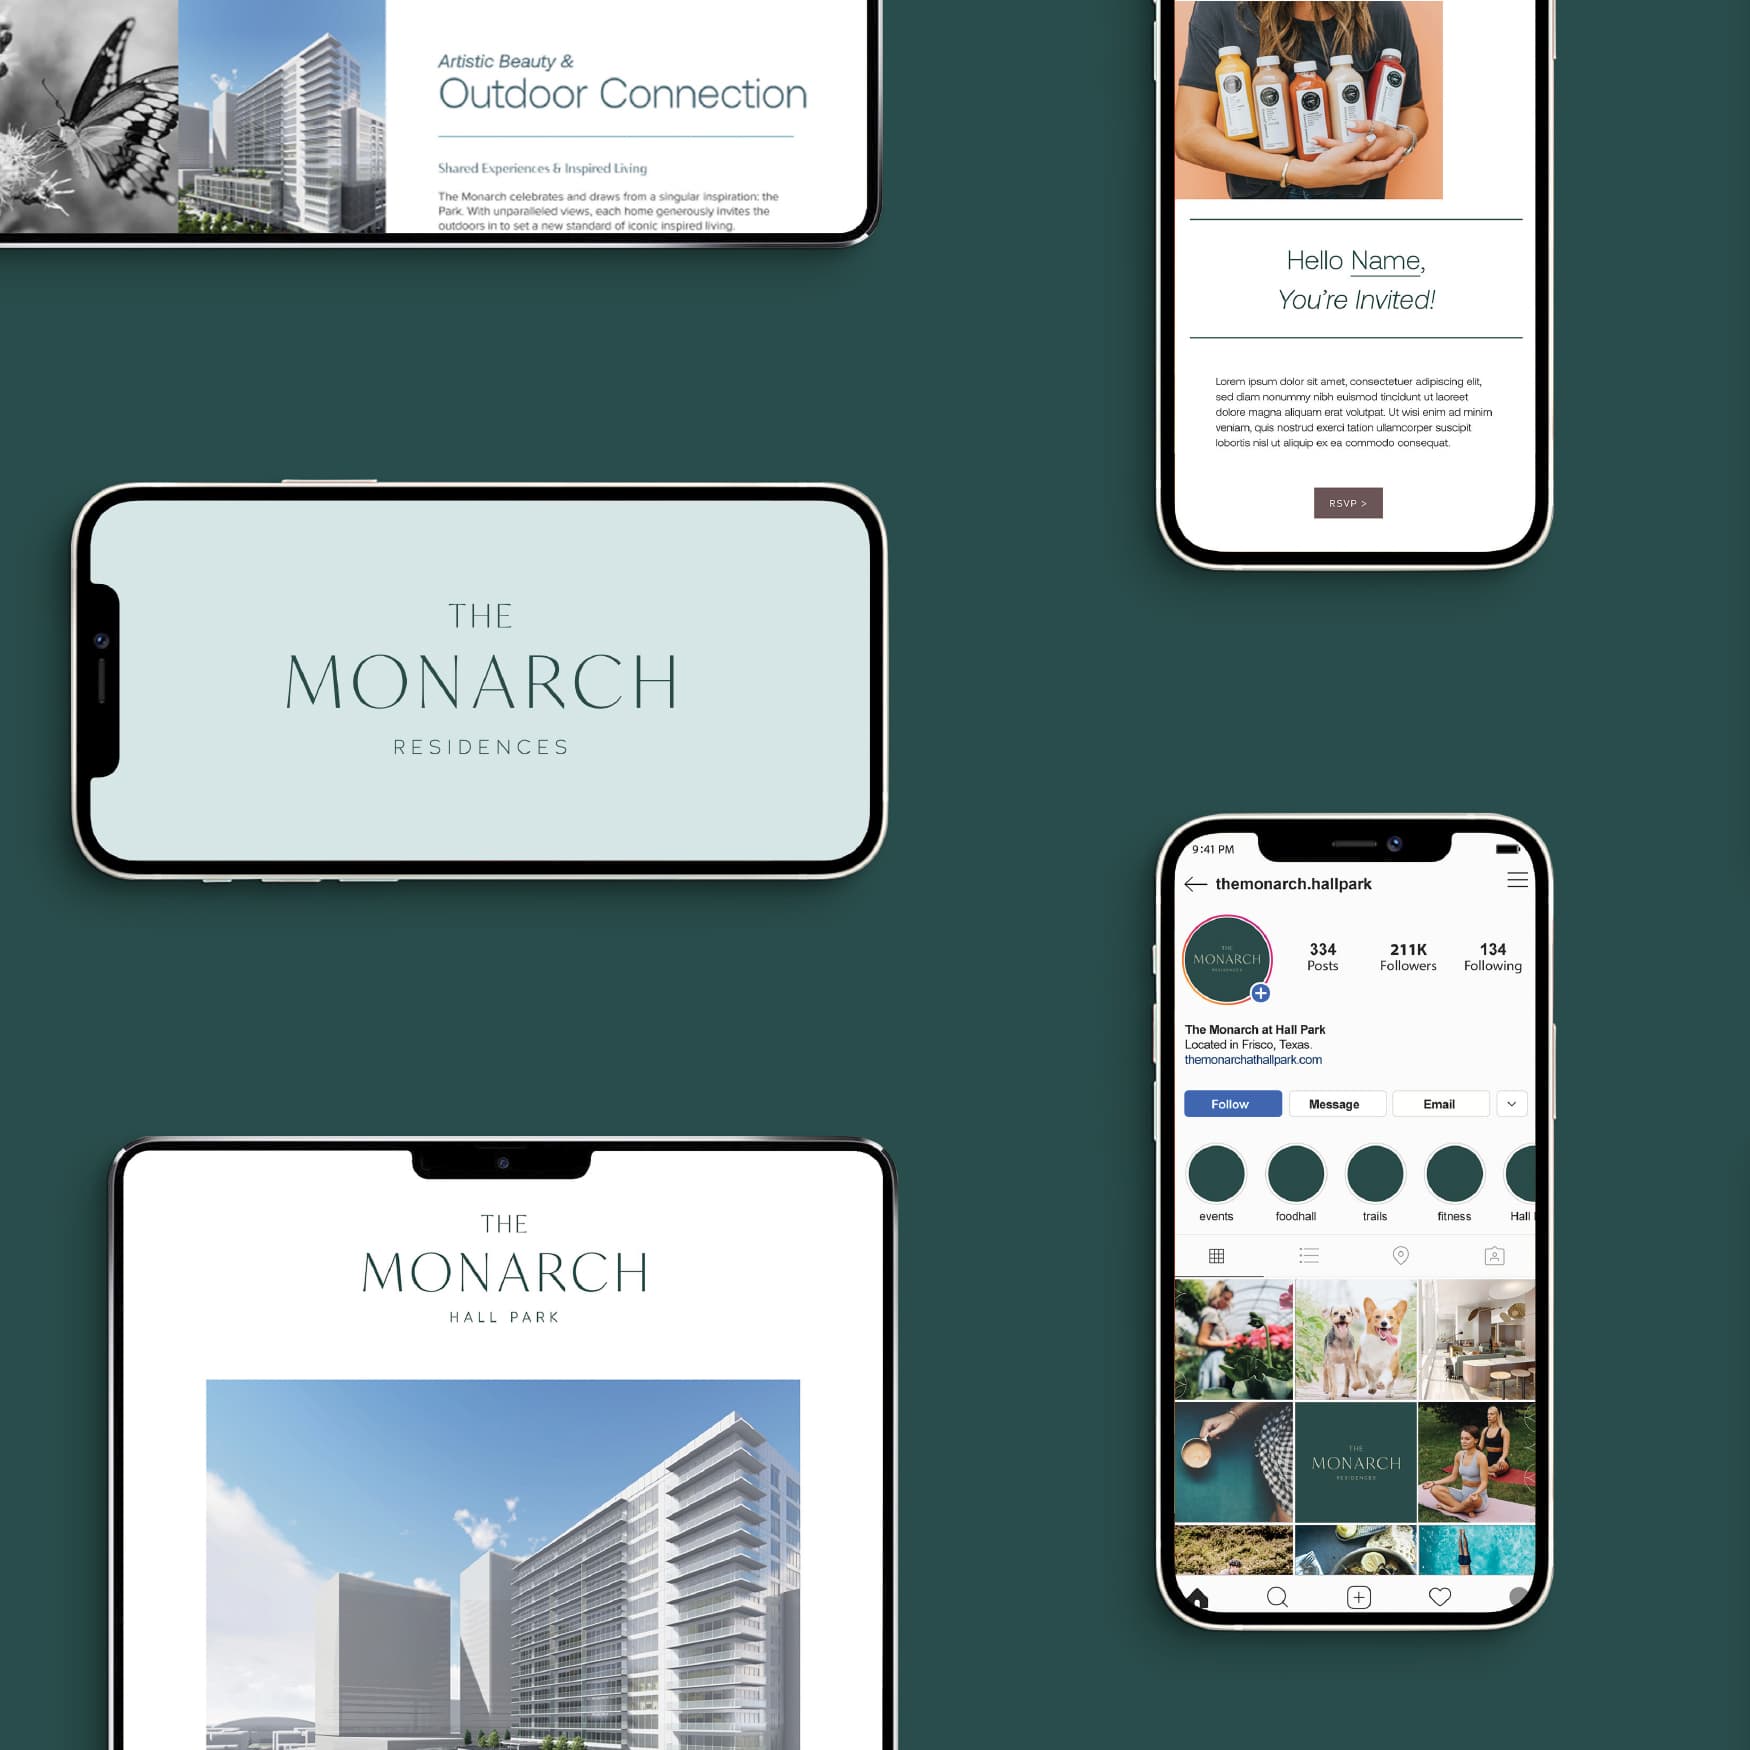 Mockups of The Monarch Residences logo and branding collateral on phones and tablets in a grid layout with green background